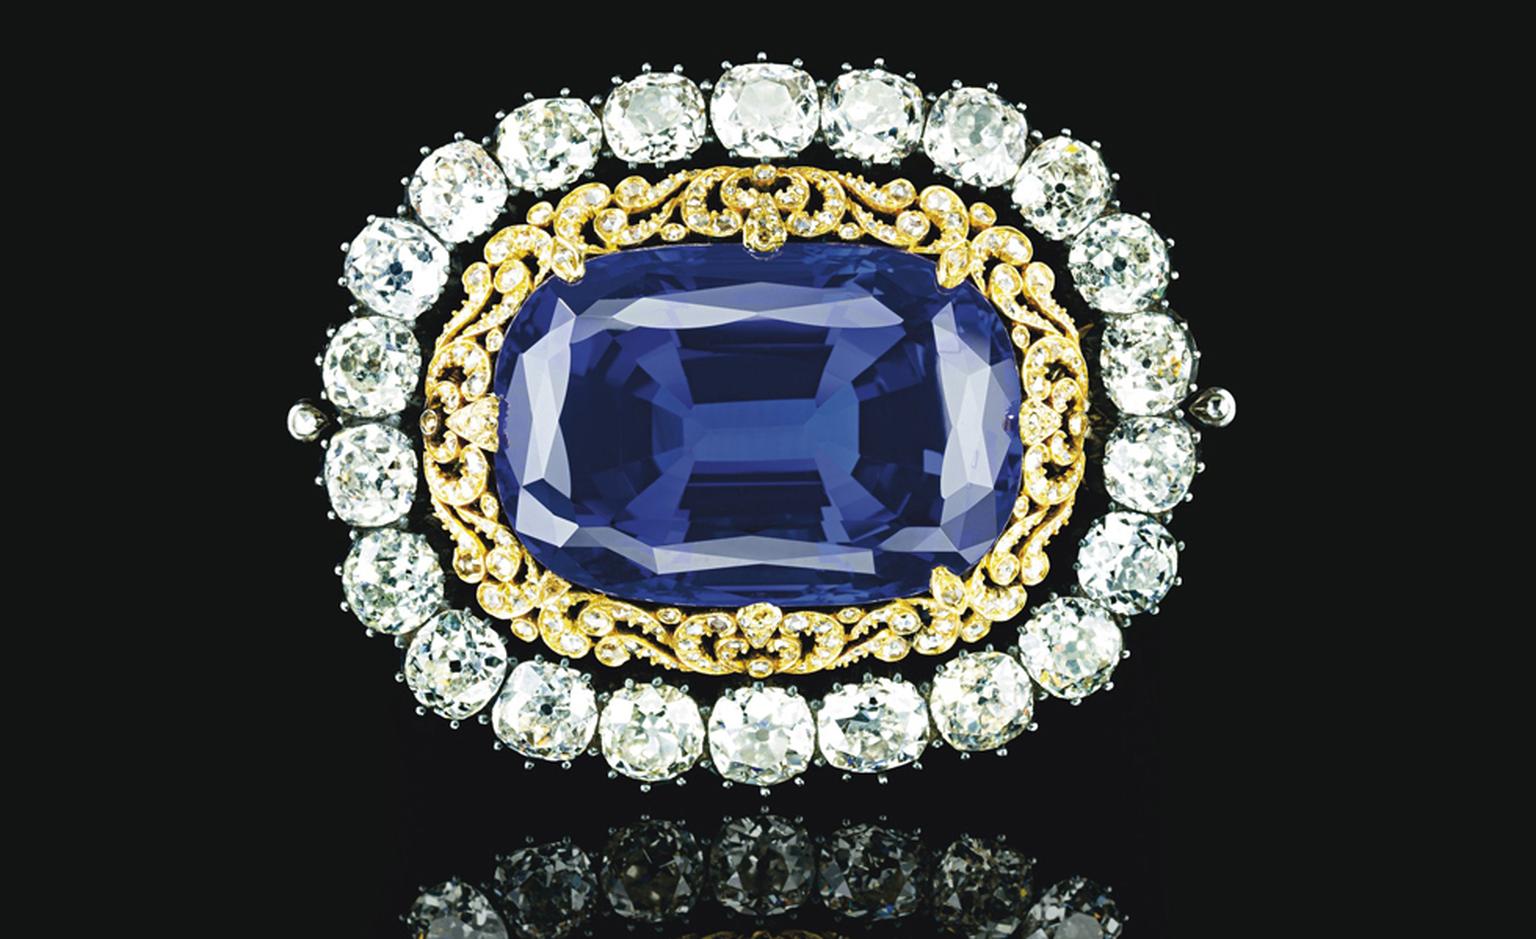 LLot 321. An Impressive sapphire and diamond brooch. Set with a cushion-cut sapphire, weighing 130.50 carats, to the openwork rose-cut diamond surround and collet-set old-cut diamond frame, mounted in silver and gold. Estimate CHF800, 000-CHF1,2...